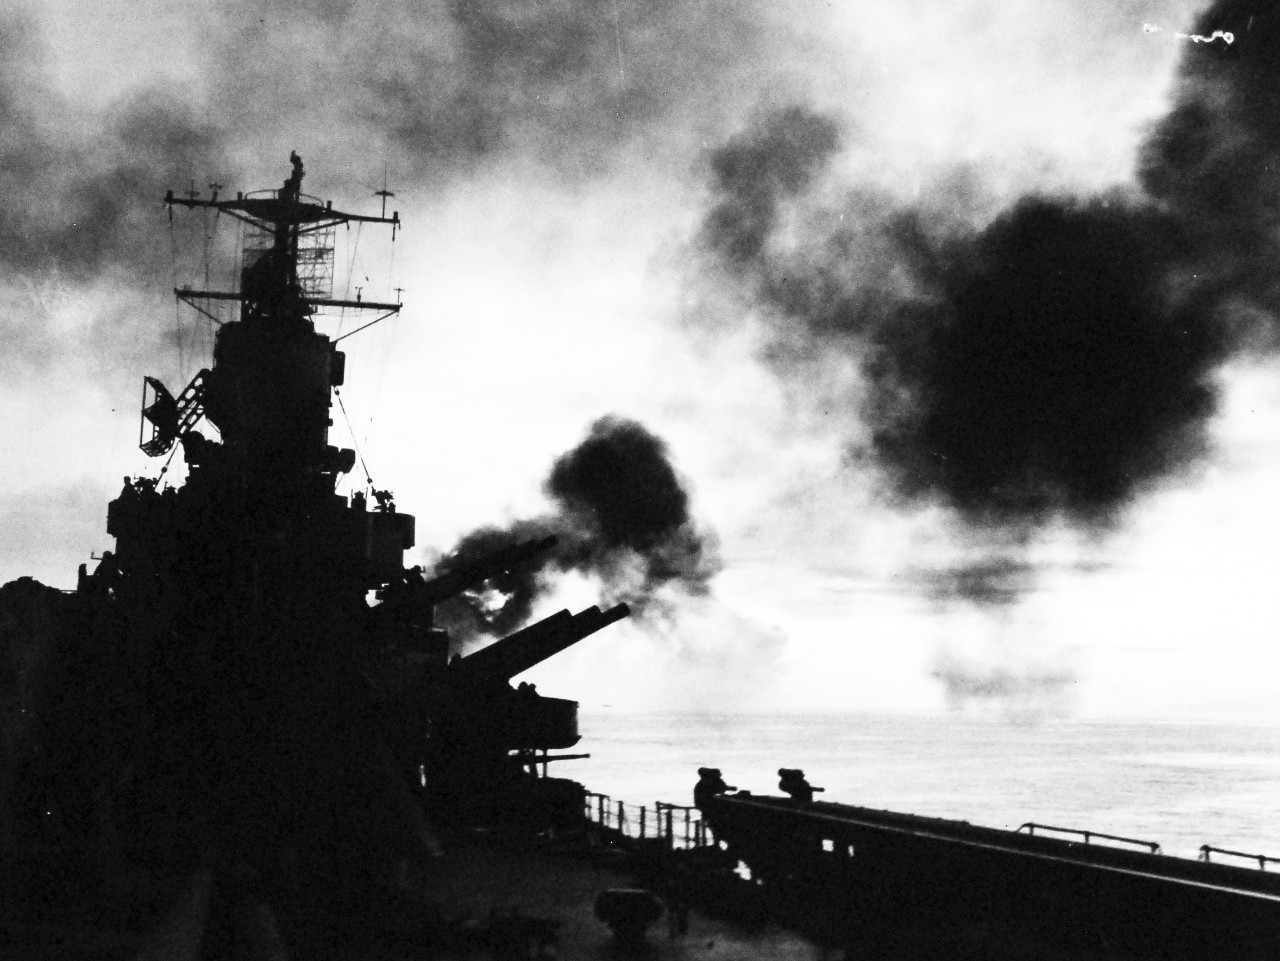 80-G-57445: Battle of Cape Gloucester, New Britain, December 1943-January 1944. Bombardment of Cape Gloucester, New Britain, by USS Phoenix (CL-46) and other ships of the Task Force. Taken by USS Nashville (CL-43), December 24-26 1943. 